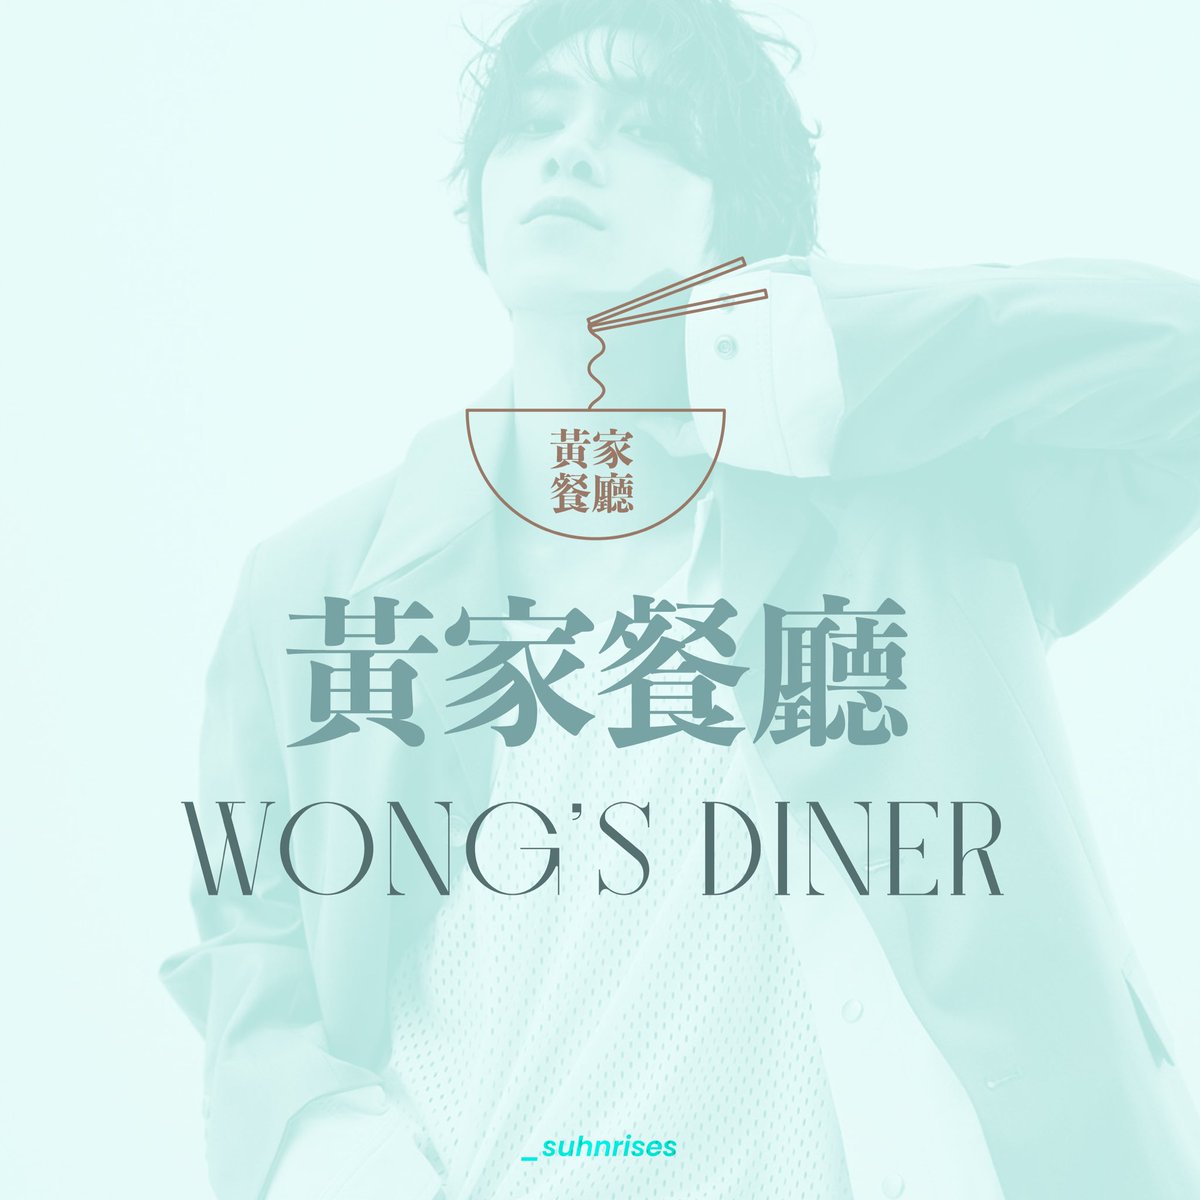 hendery: wong’s diner (黃家餐廳)- diner/restaurant - probably upscale and expensive; costs u $67 for tap water or sumn; serves local cantonese diner foods but made classy with farmers market ingredients + a thicc bill - still a super fun place to be, v high energy & fun